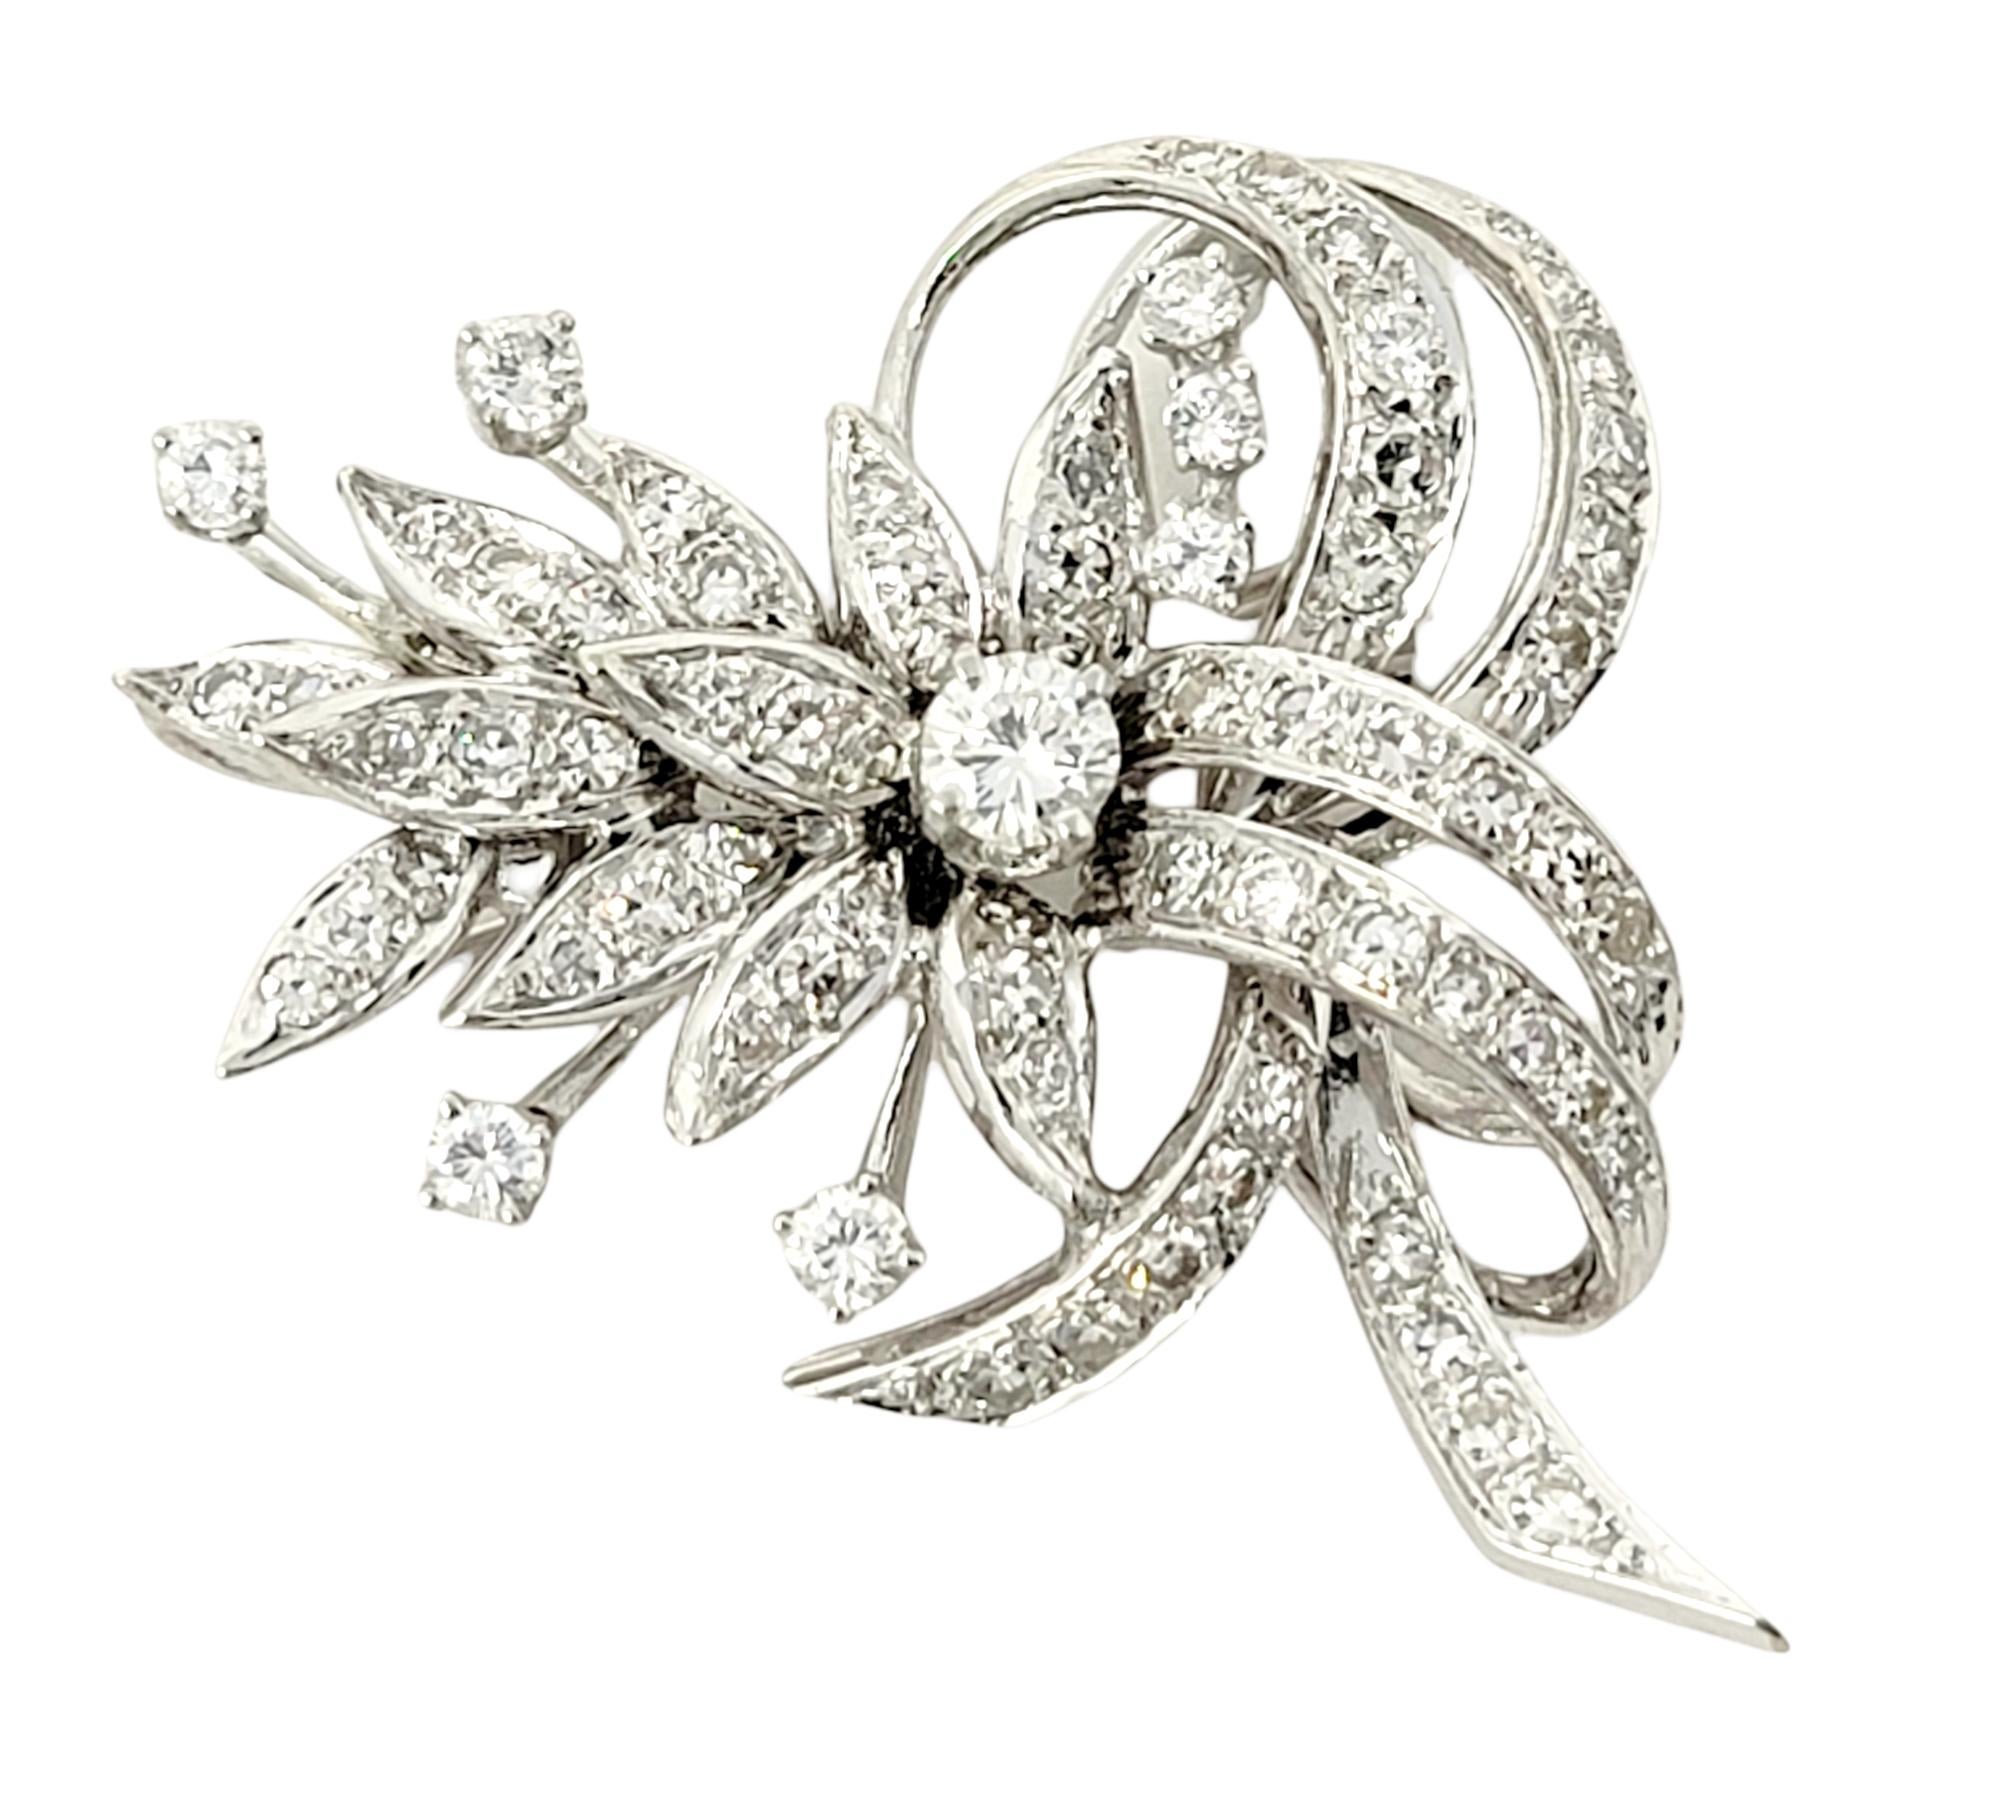 Gorgeous vintage style brooch bursting with incredible sparkle. This absolutely beautiful brooch is made of 14 karat white gold and arranged in a horizontal layout. It features 73 icy white natural round brilliant diamonds set in a clustered floral